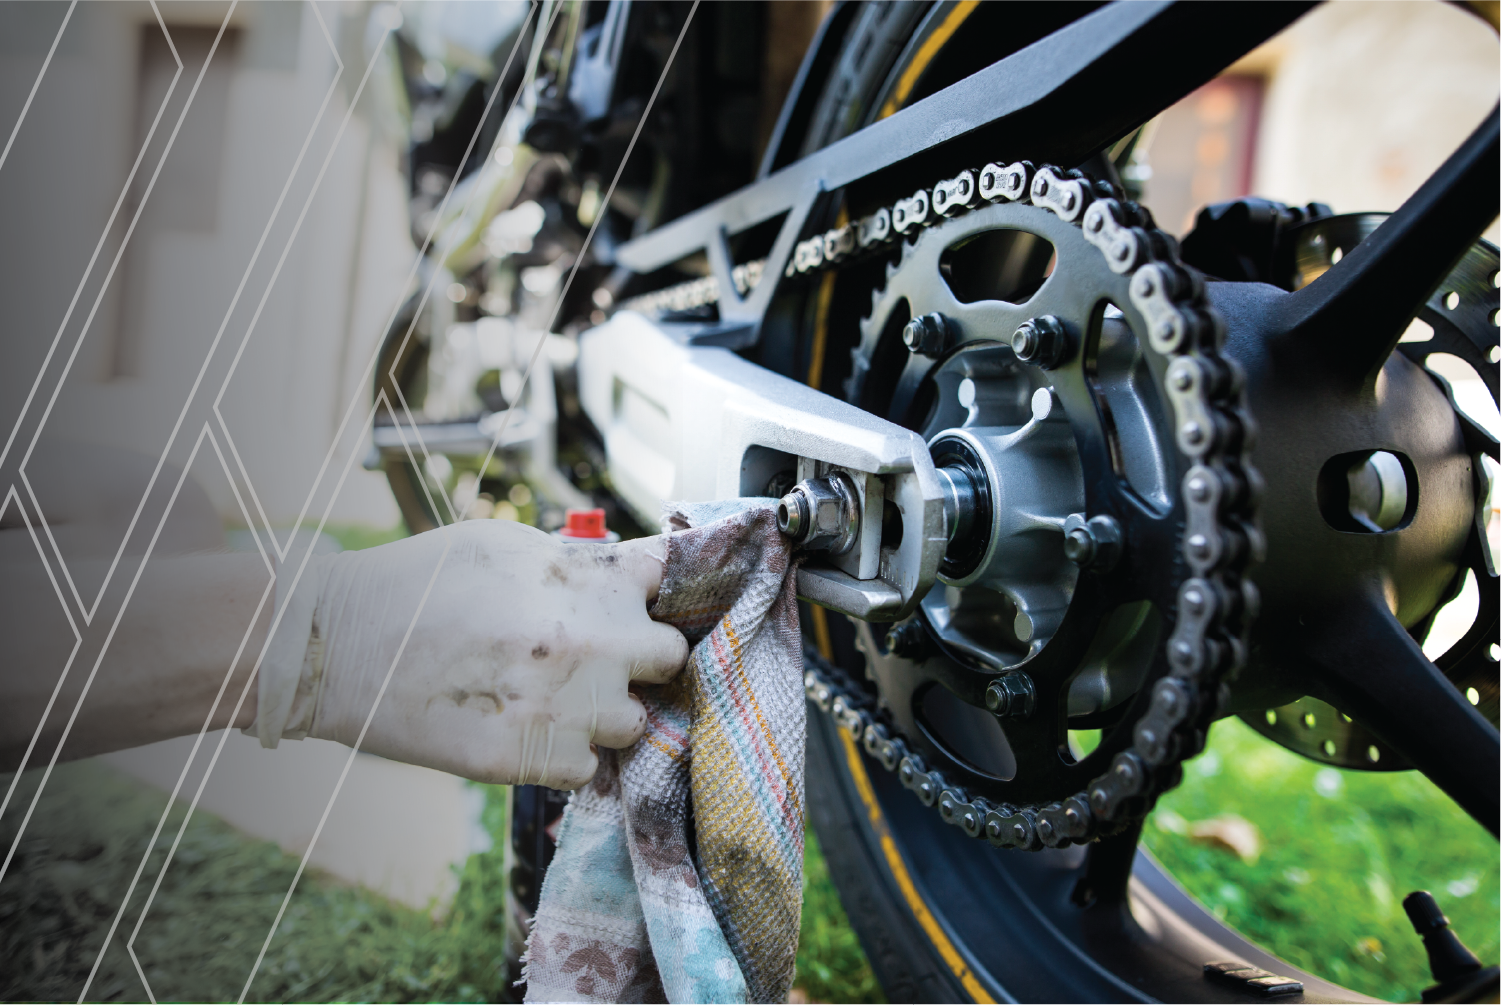 BASIC BIKE CARE TIPS TO MAINTAIN YOUR BIKE IN GOOD CONDITION & HEALTH